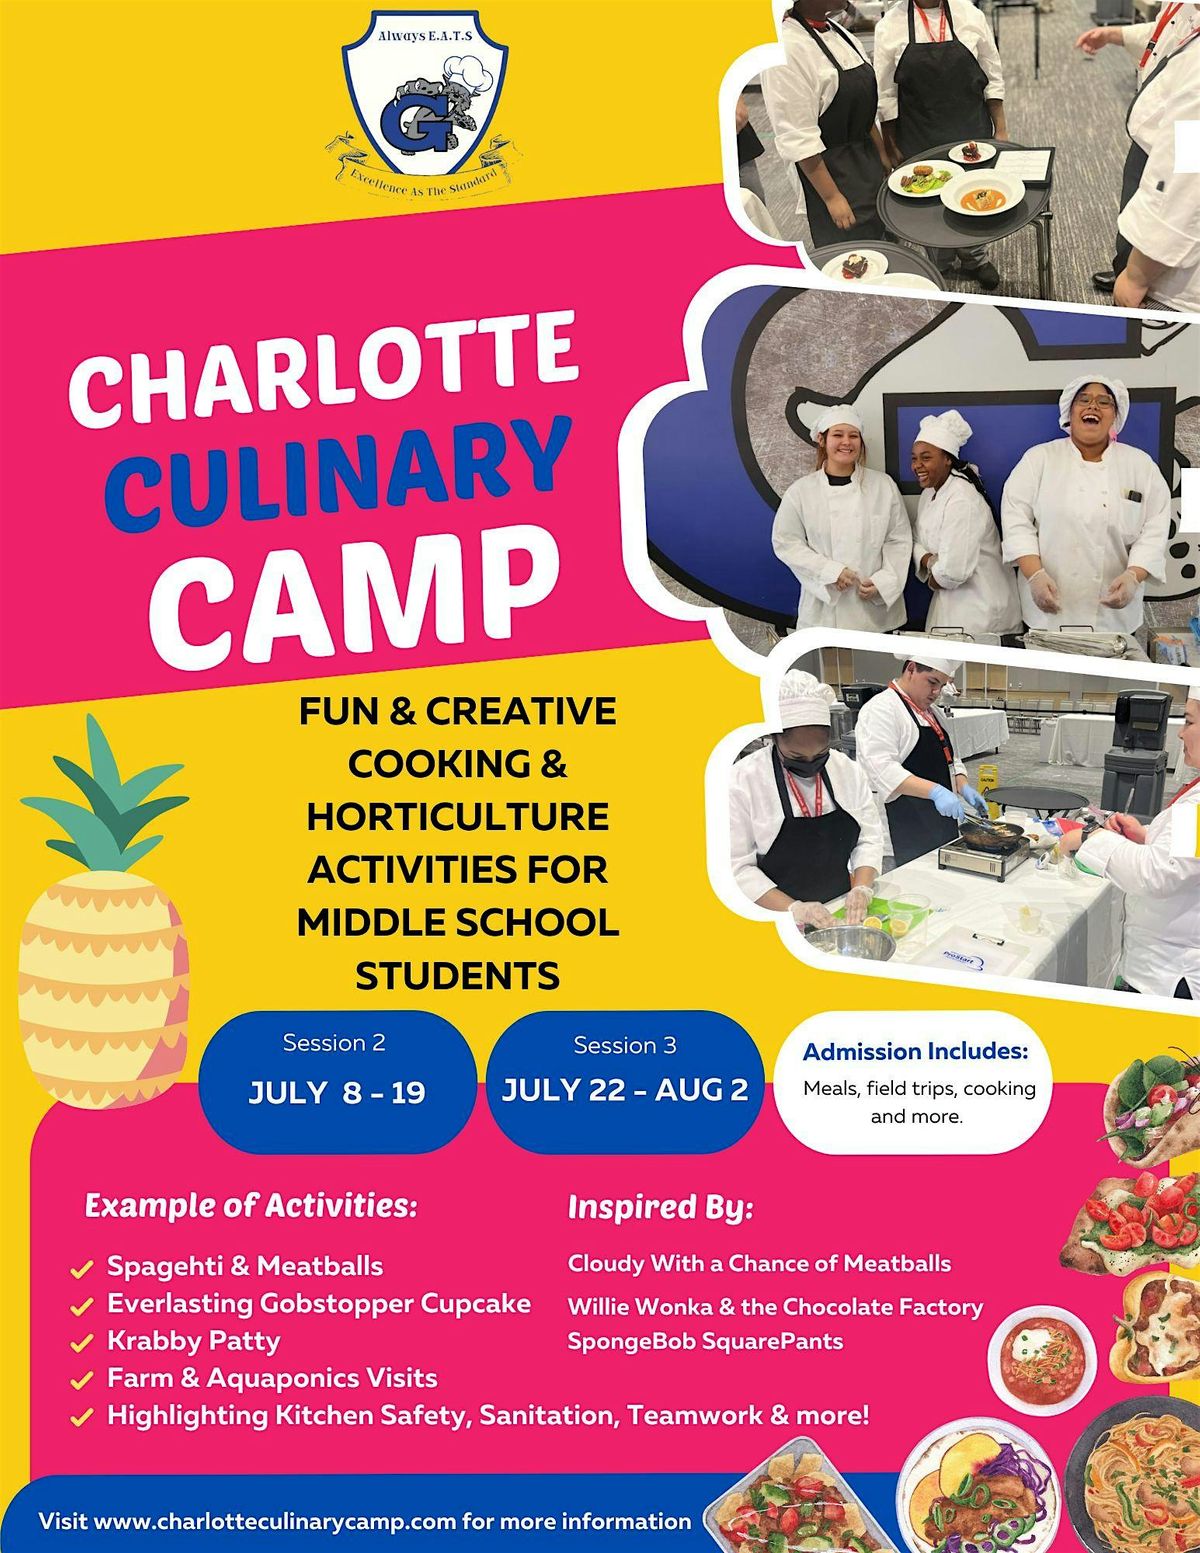 Charlotte Culinary Camp Session 3